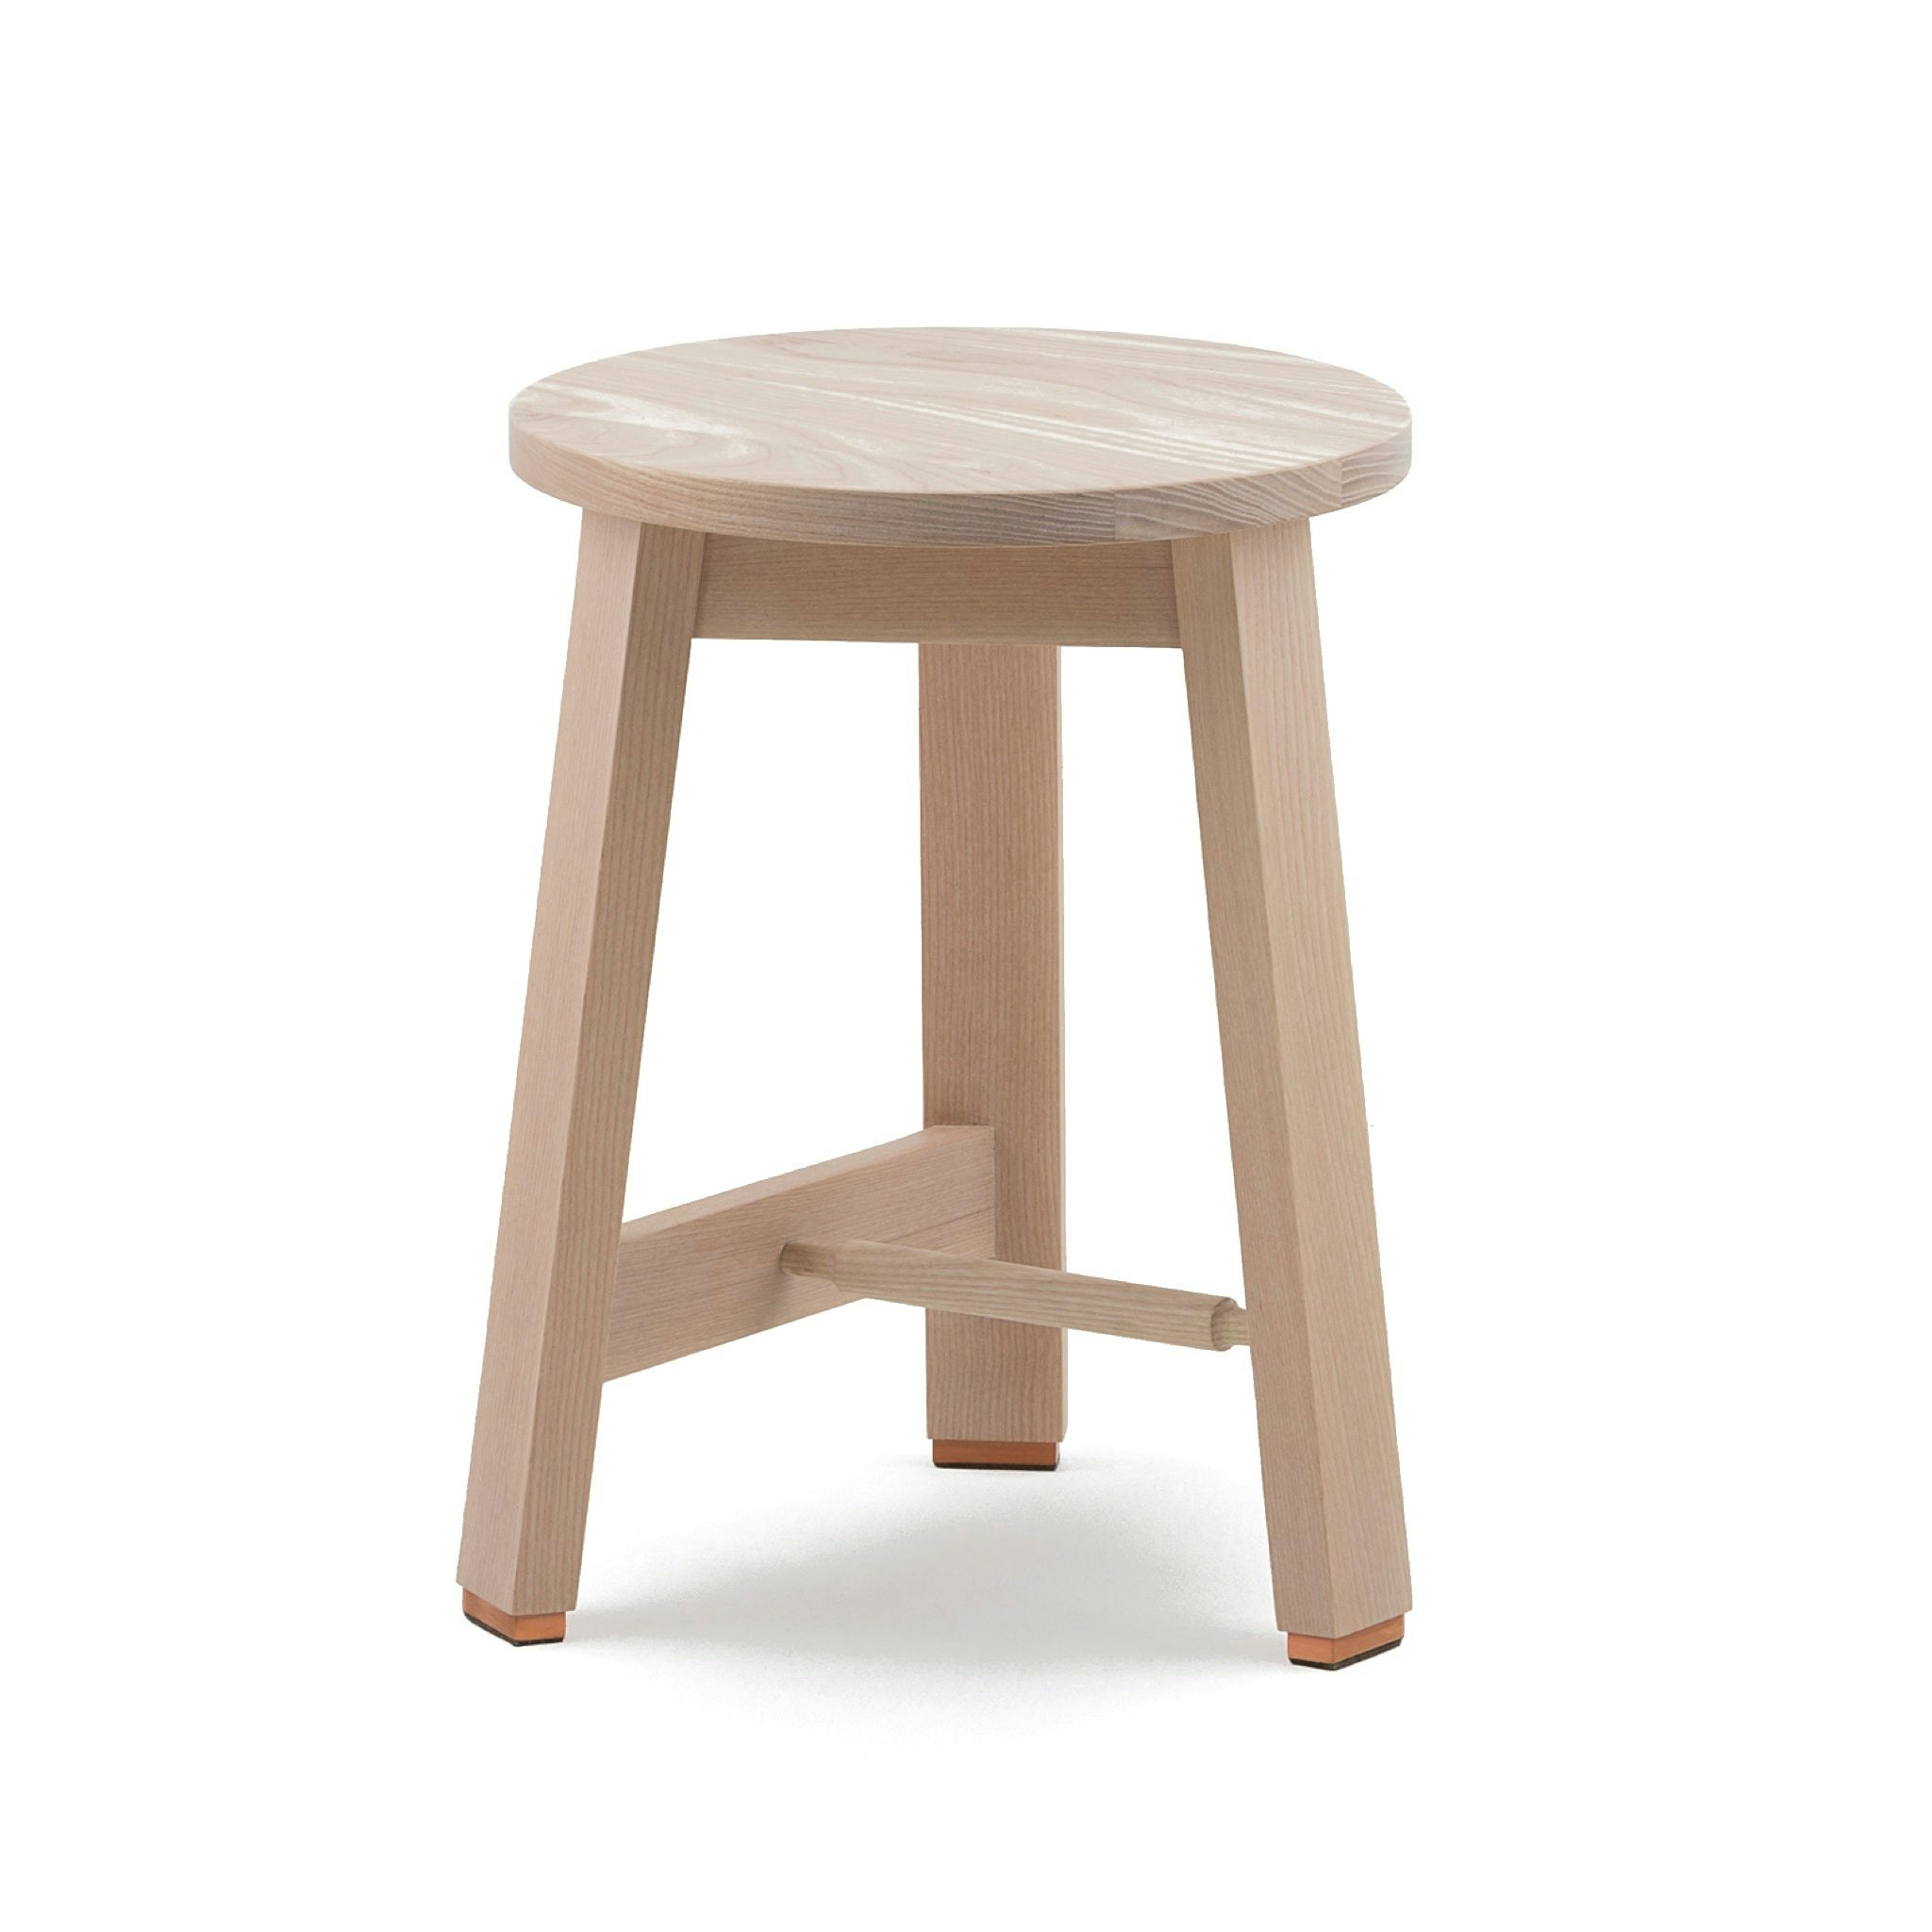 Clearance 441 Stool / White Oiled Oak by Ilse Crawford